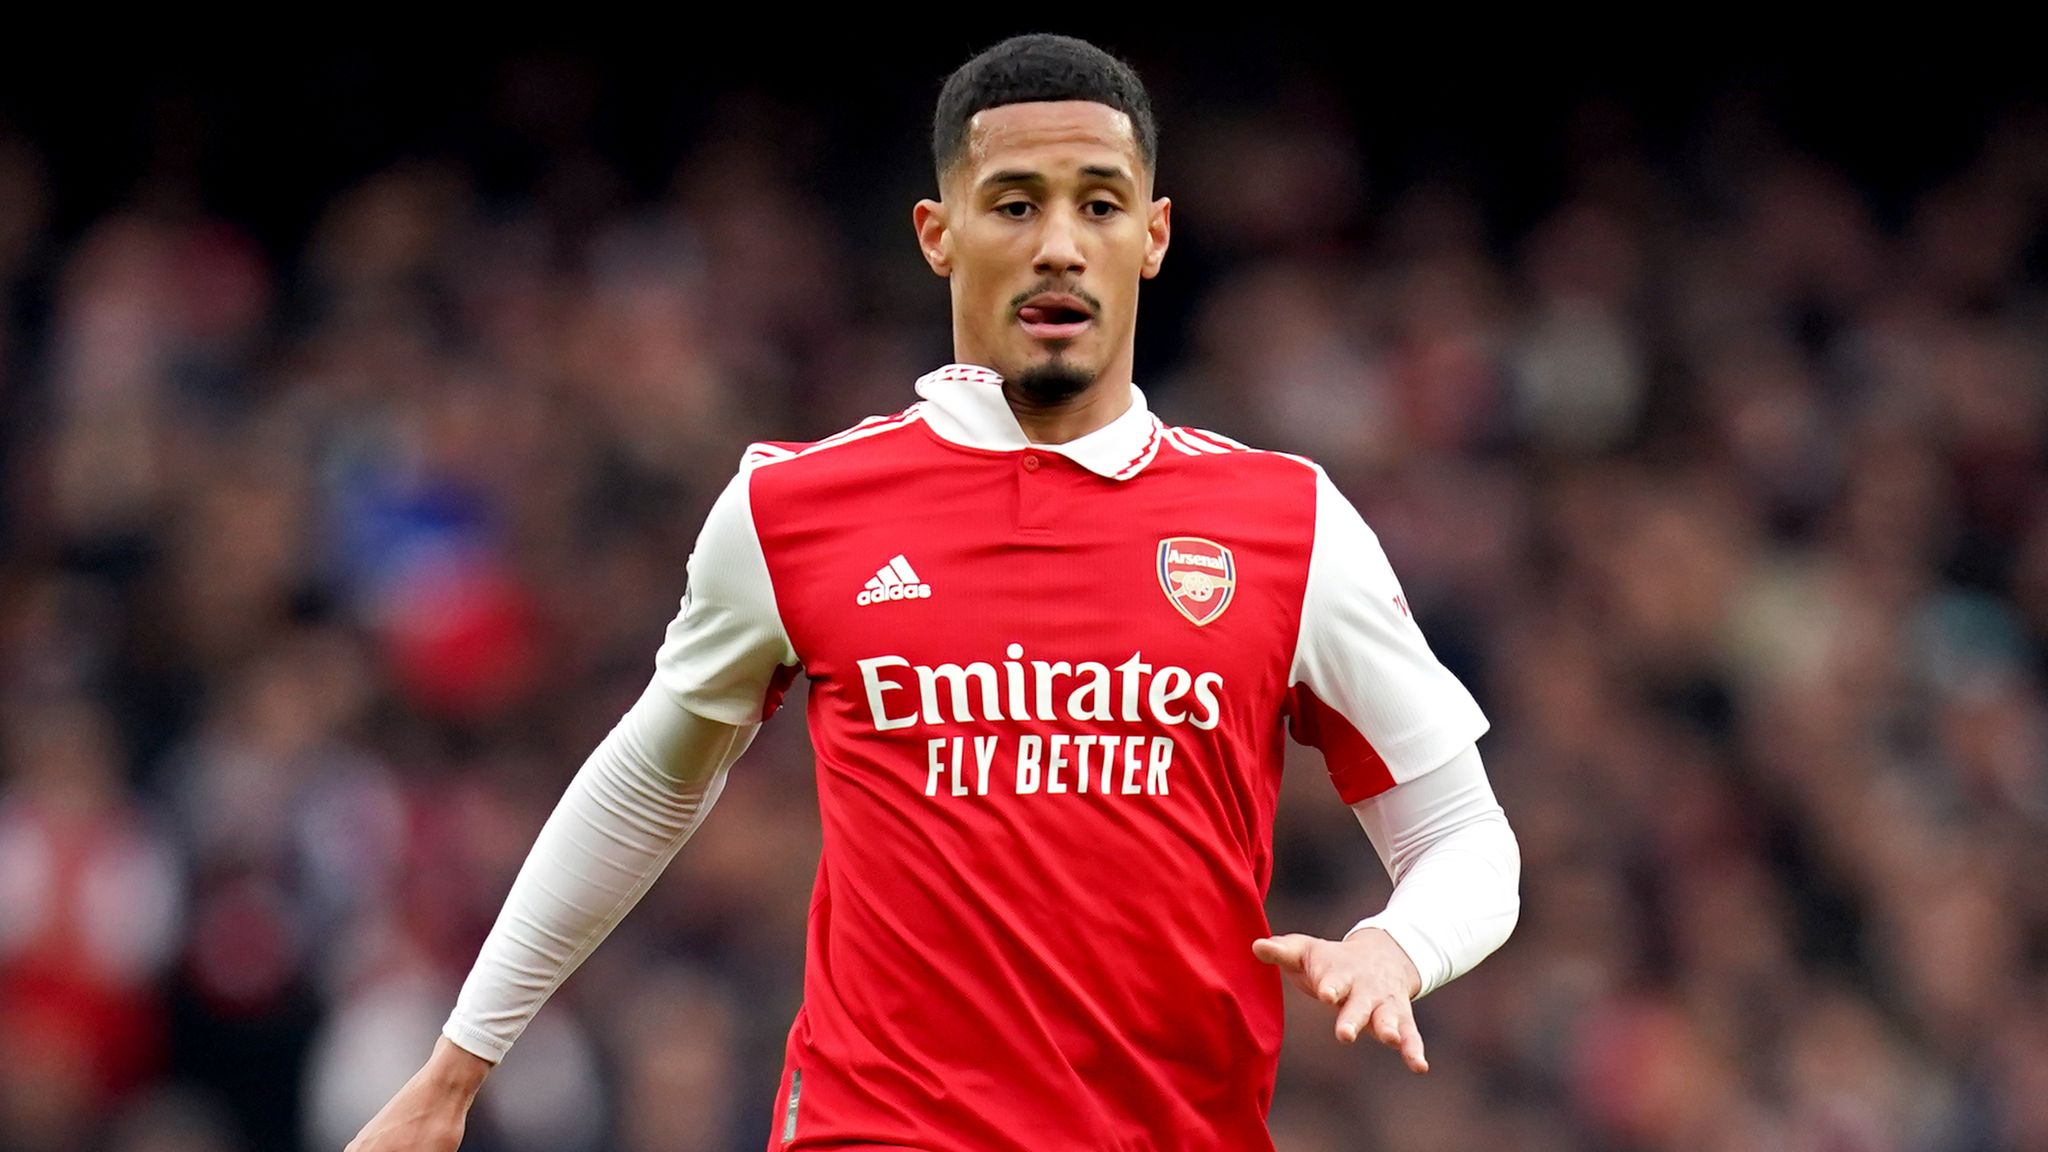  William Saliba and Gabriel of Arsenal defend against Manchester City during a Premier League match at the Emirates Stadium in London, England.